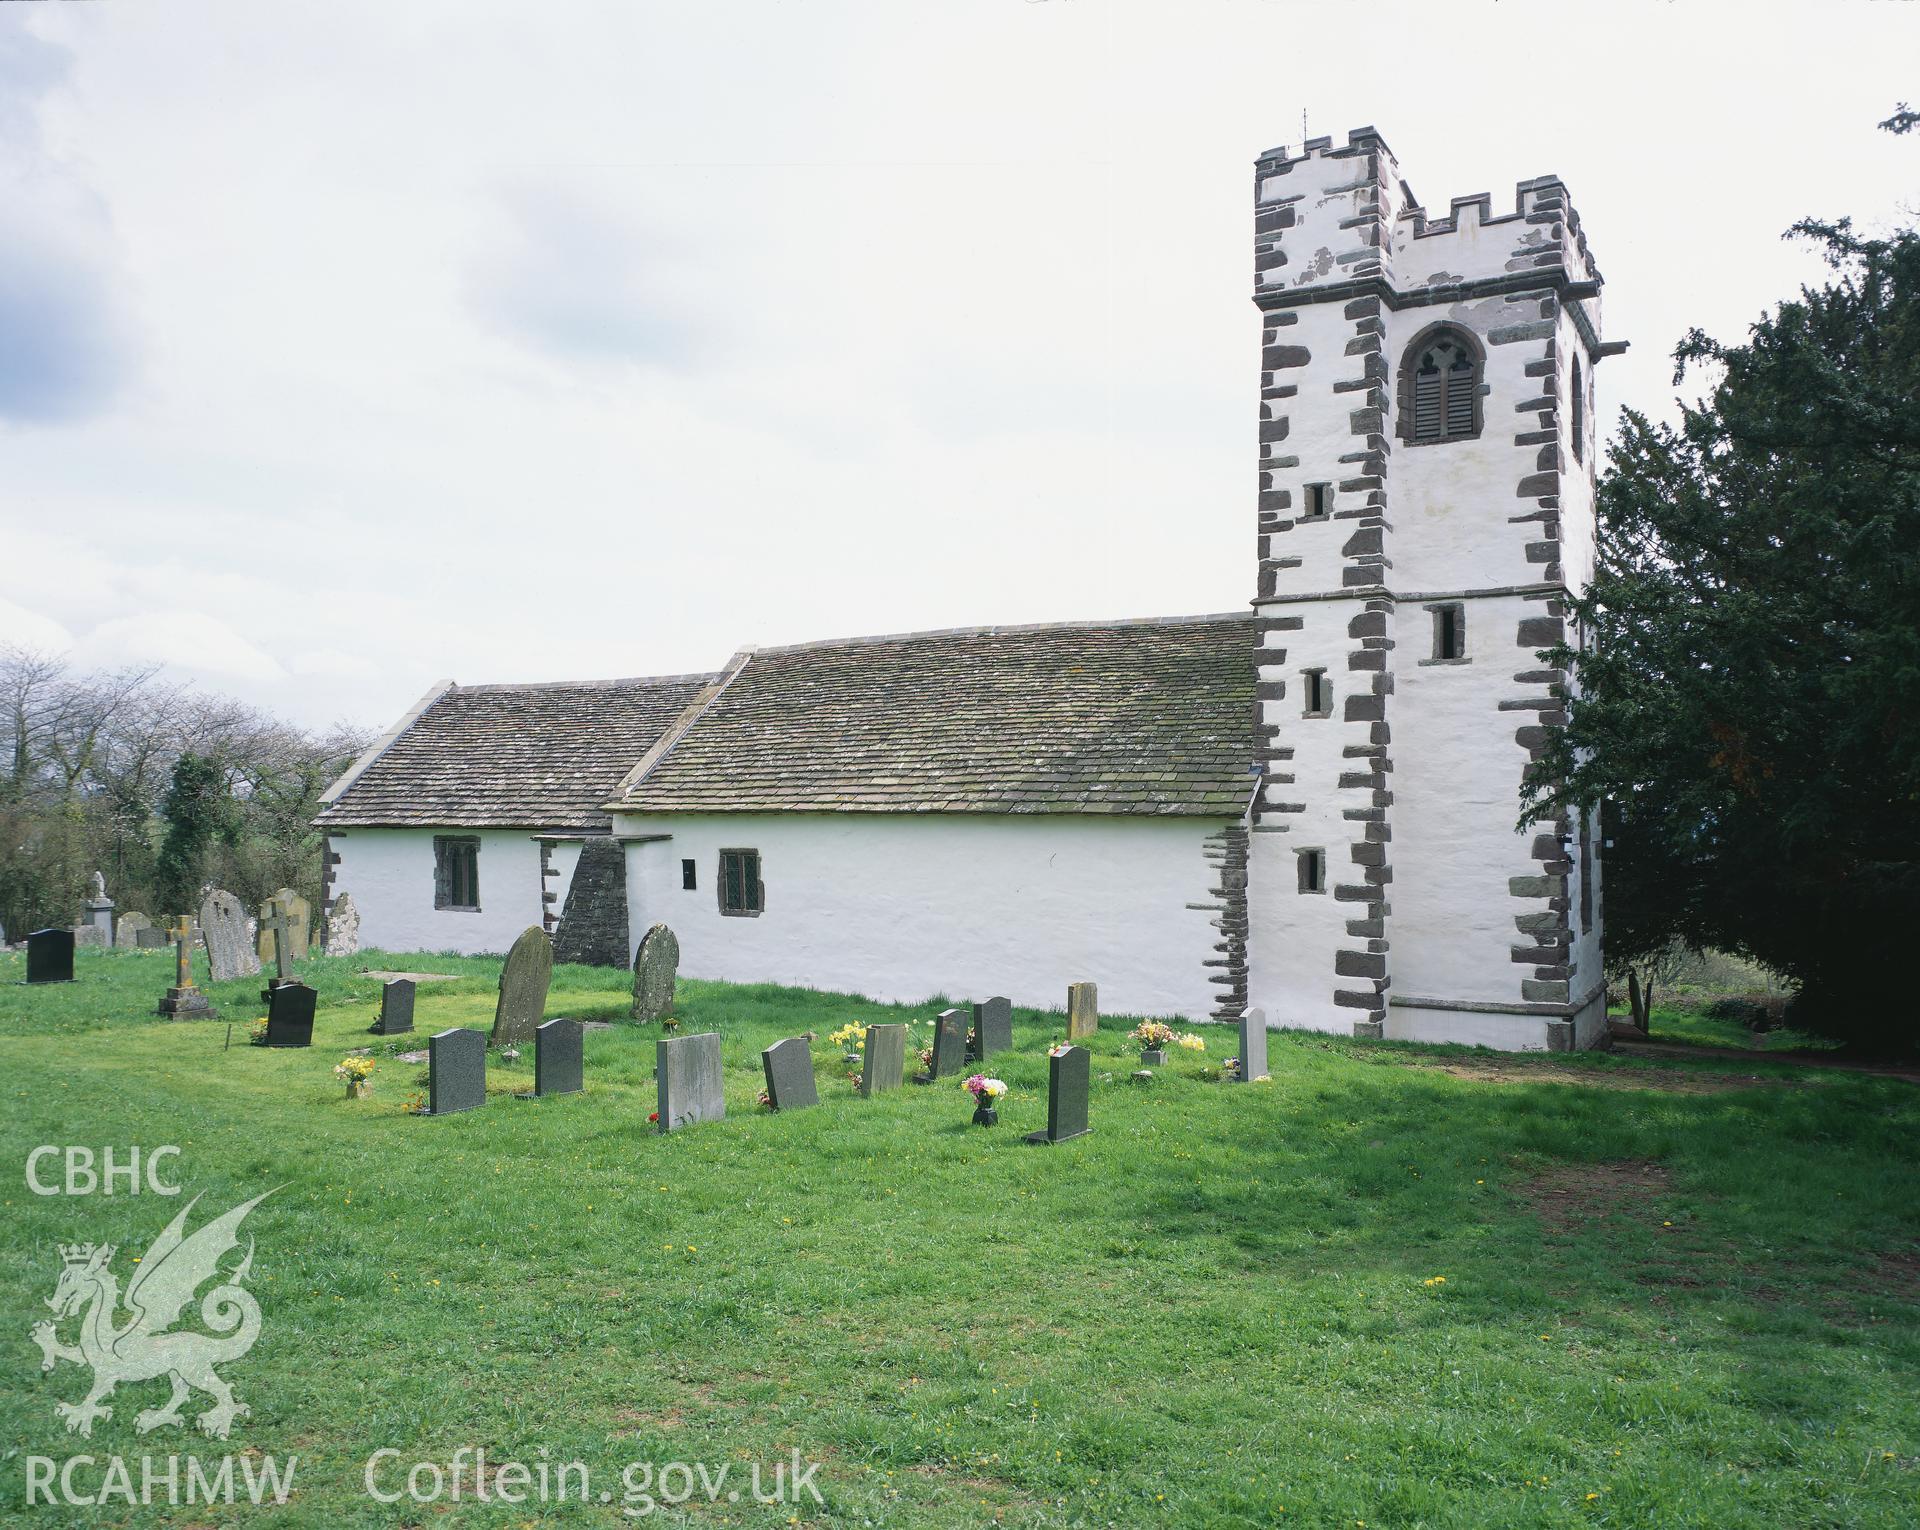 RCAHMW colour transparency showing exterior view of St Cadoc's Church, Llangattock Lingoed.